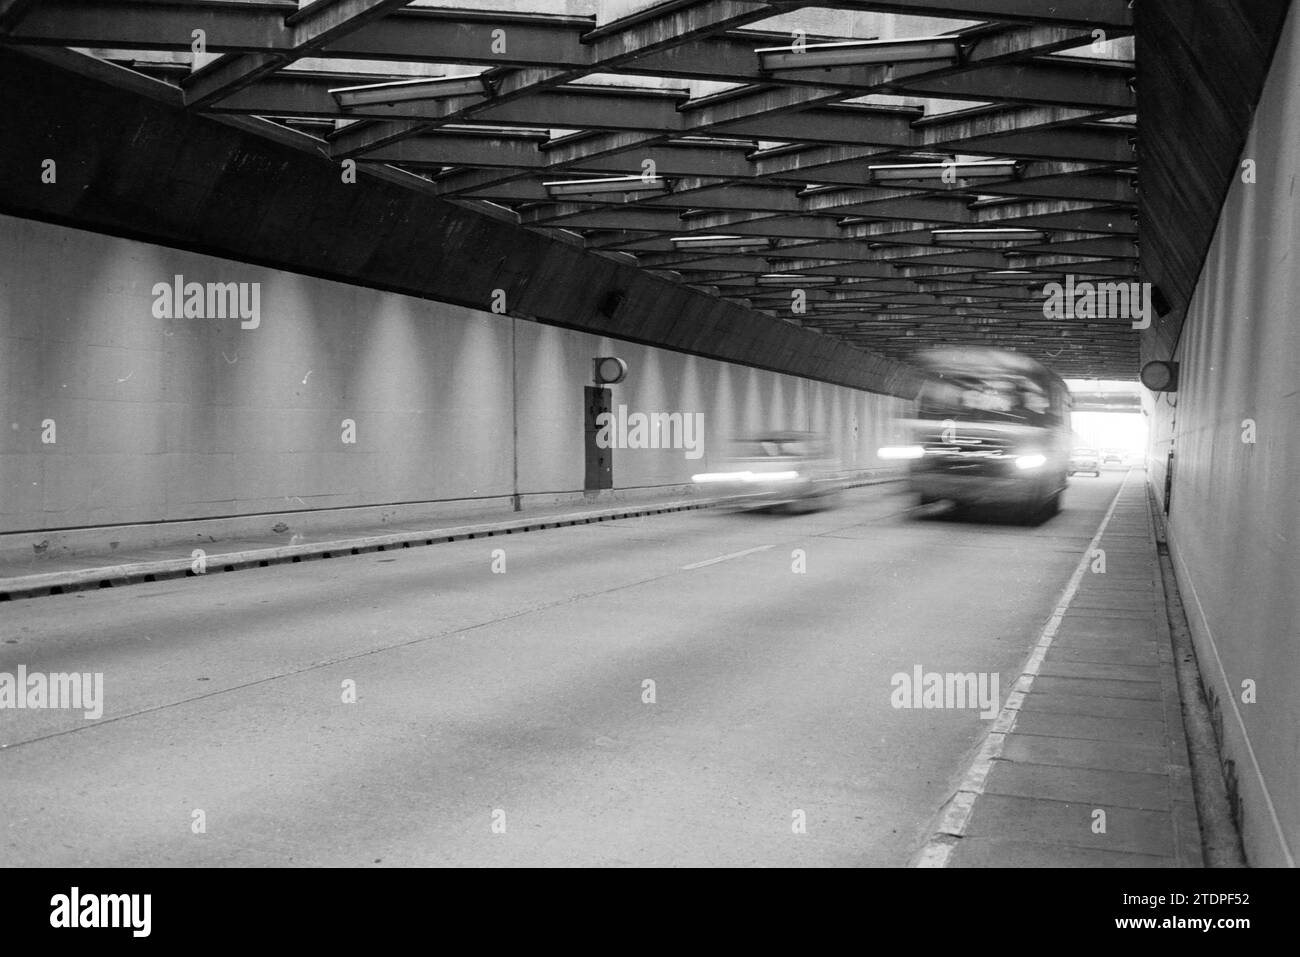 Report Velsertunnel, Report, Velsertunnel, 25-09-1967, Whizgle News from the Past, Tailored for the Future. Explore historical narratives, Dutch The Netherlands agency image with a modern perspective, bridging the gap between yesterday's events and tomorrow's insights. A timeless journey shaping the stories that shape our future Stock Photo